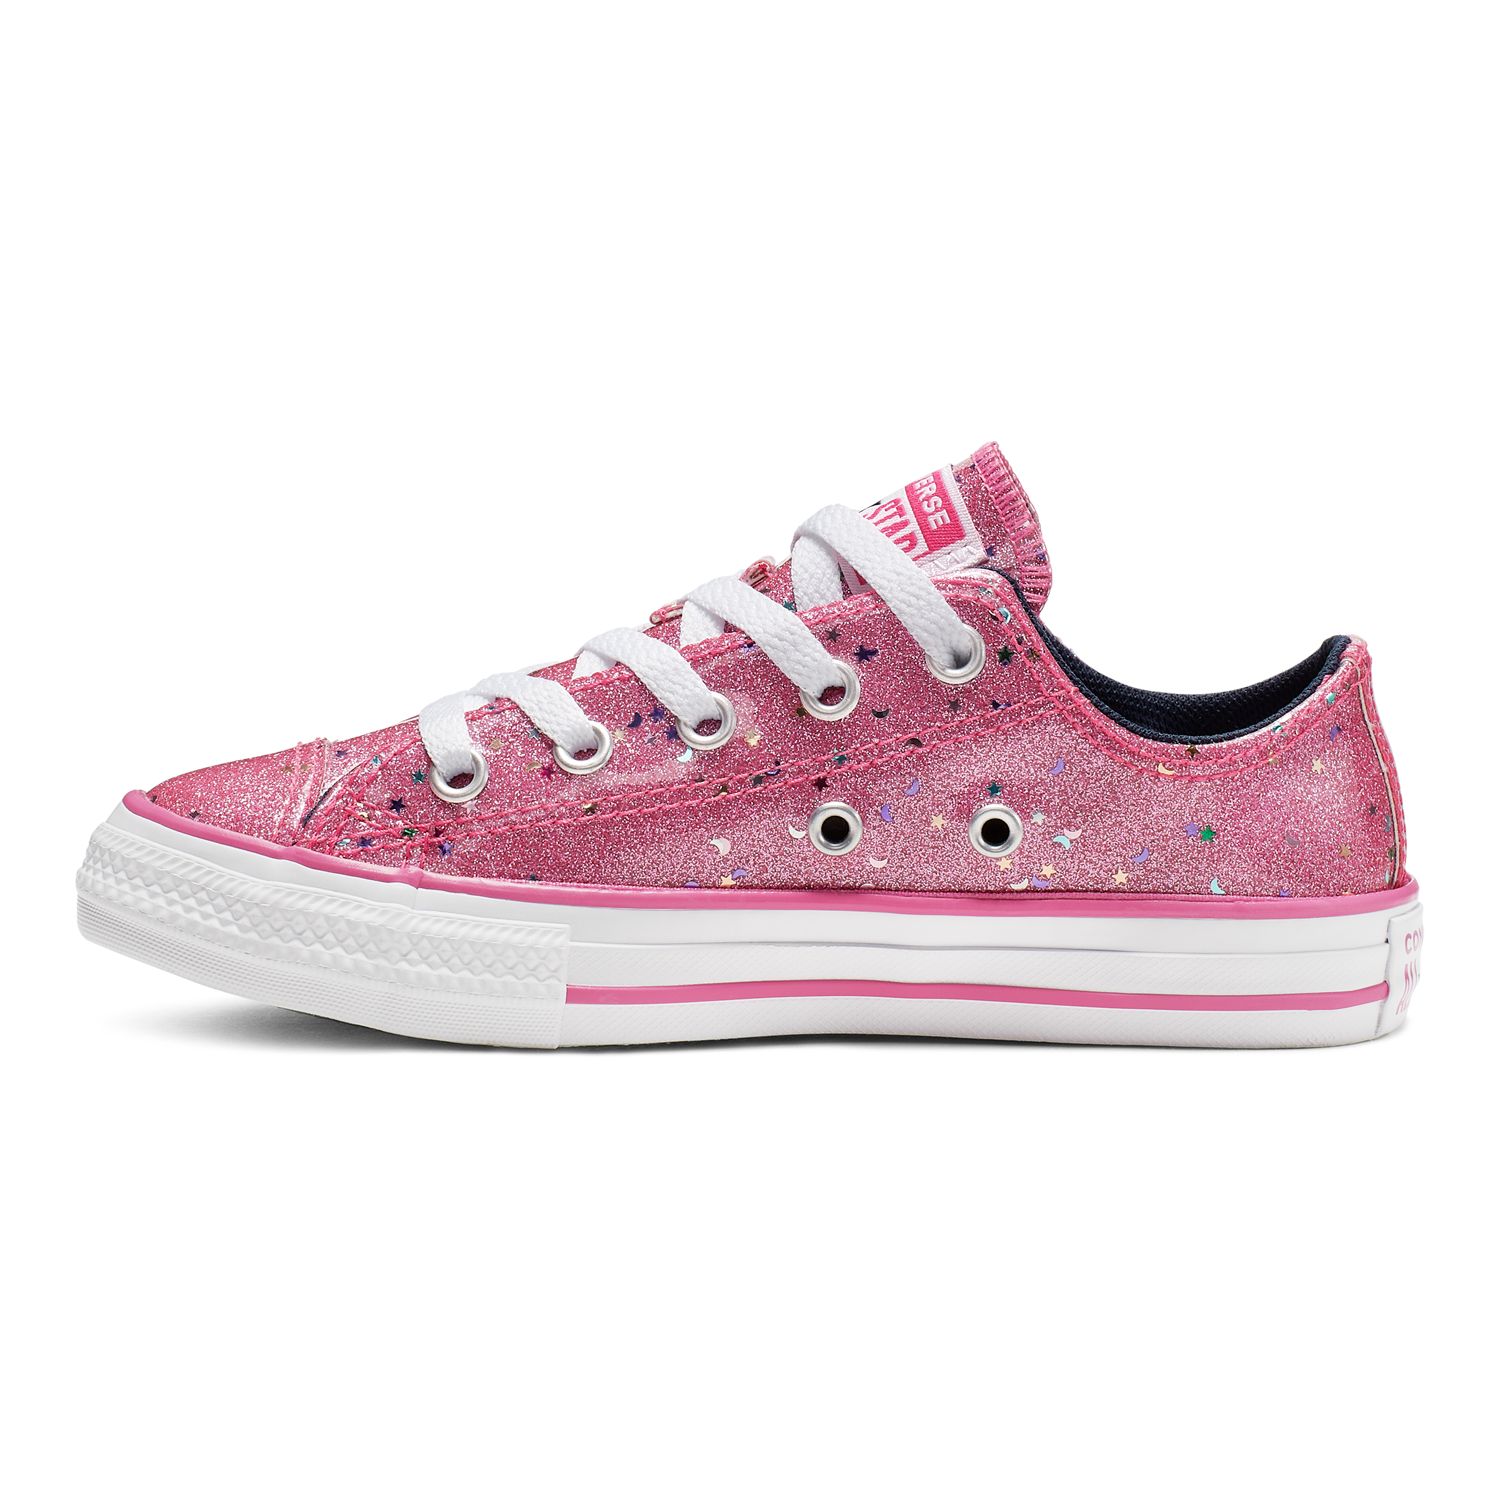 Pink Converse Shoes | Kohl's